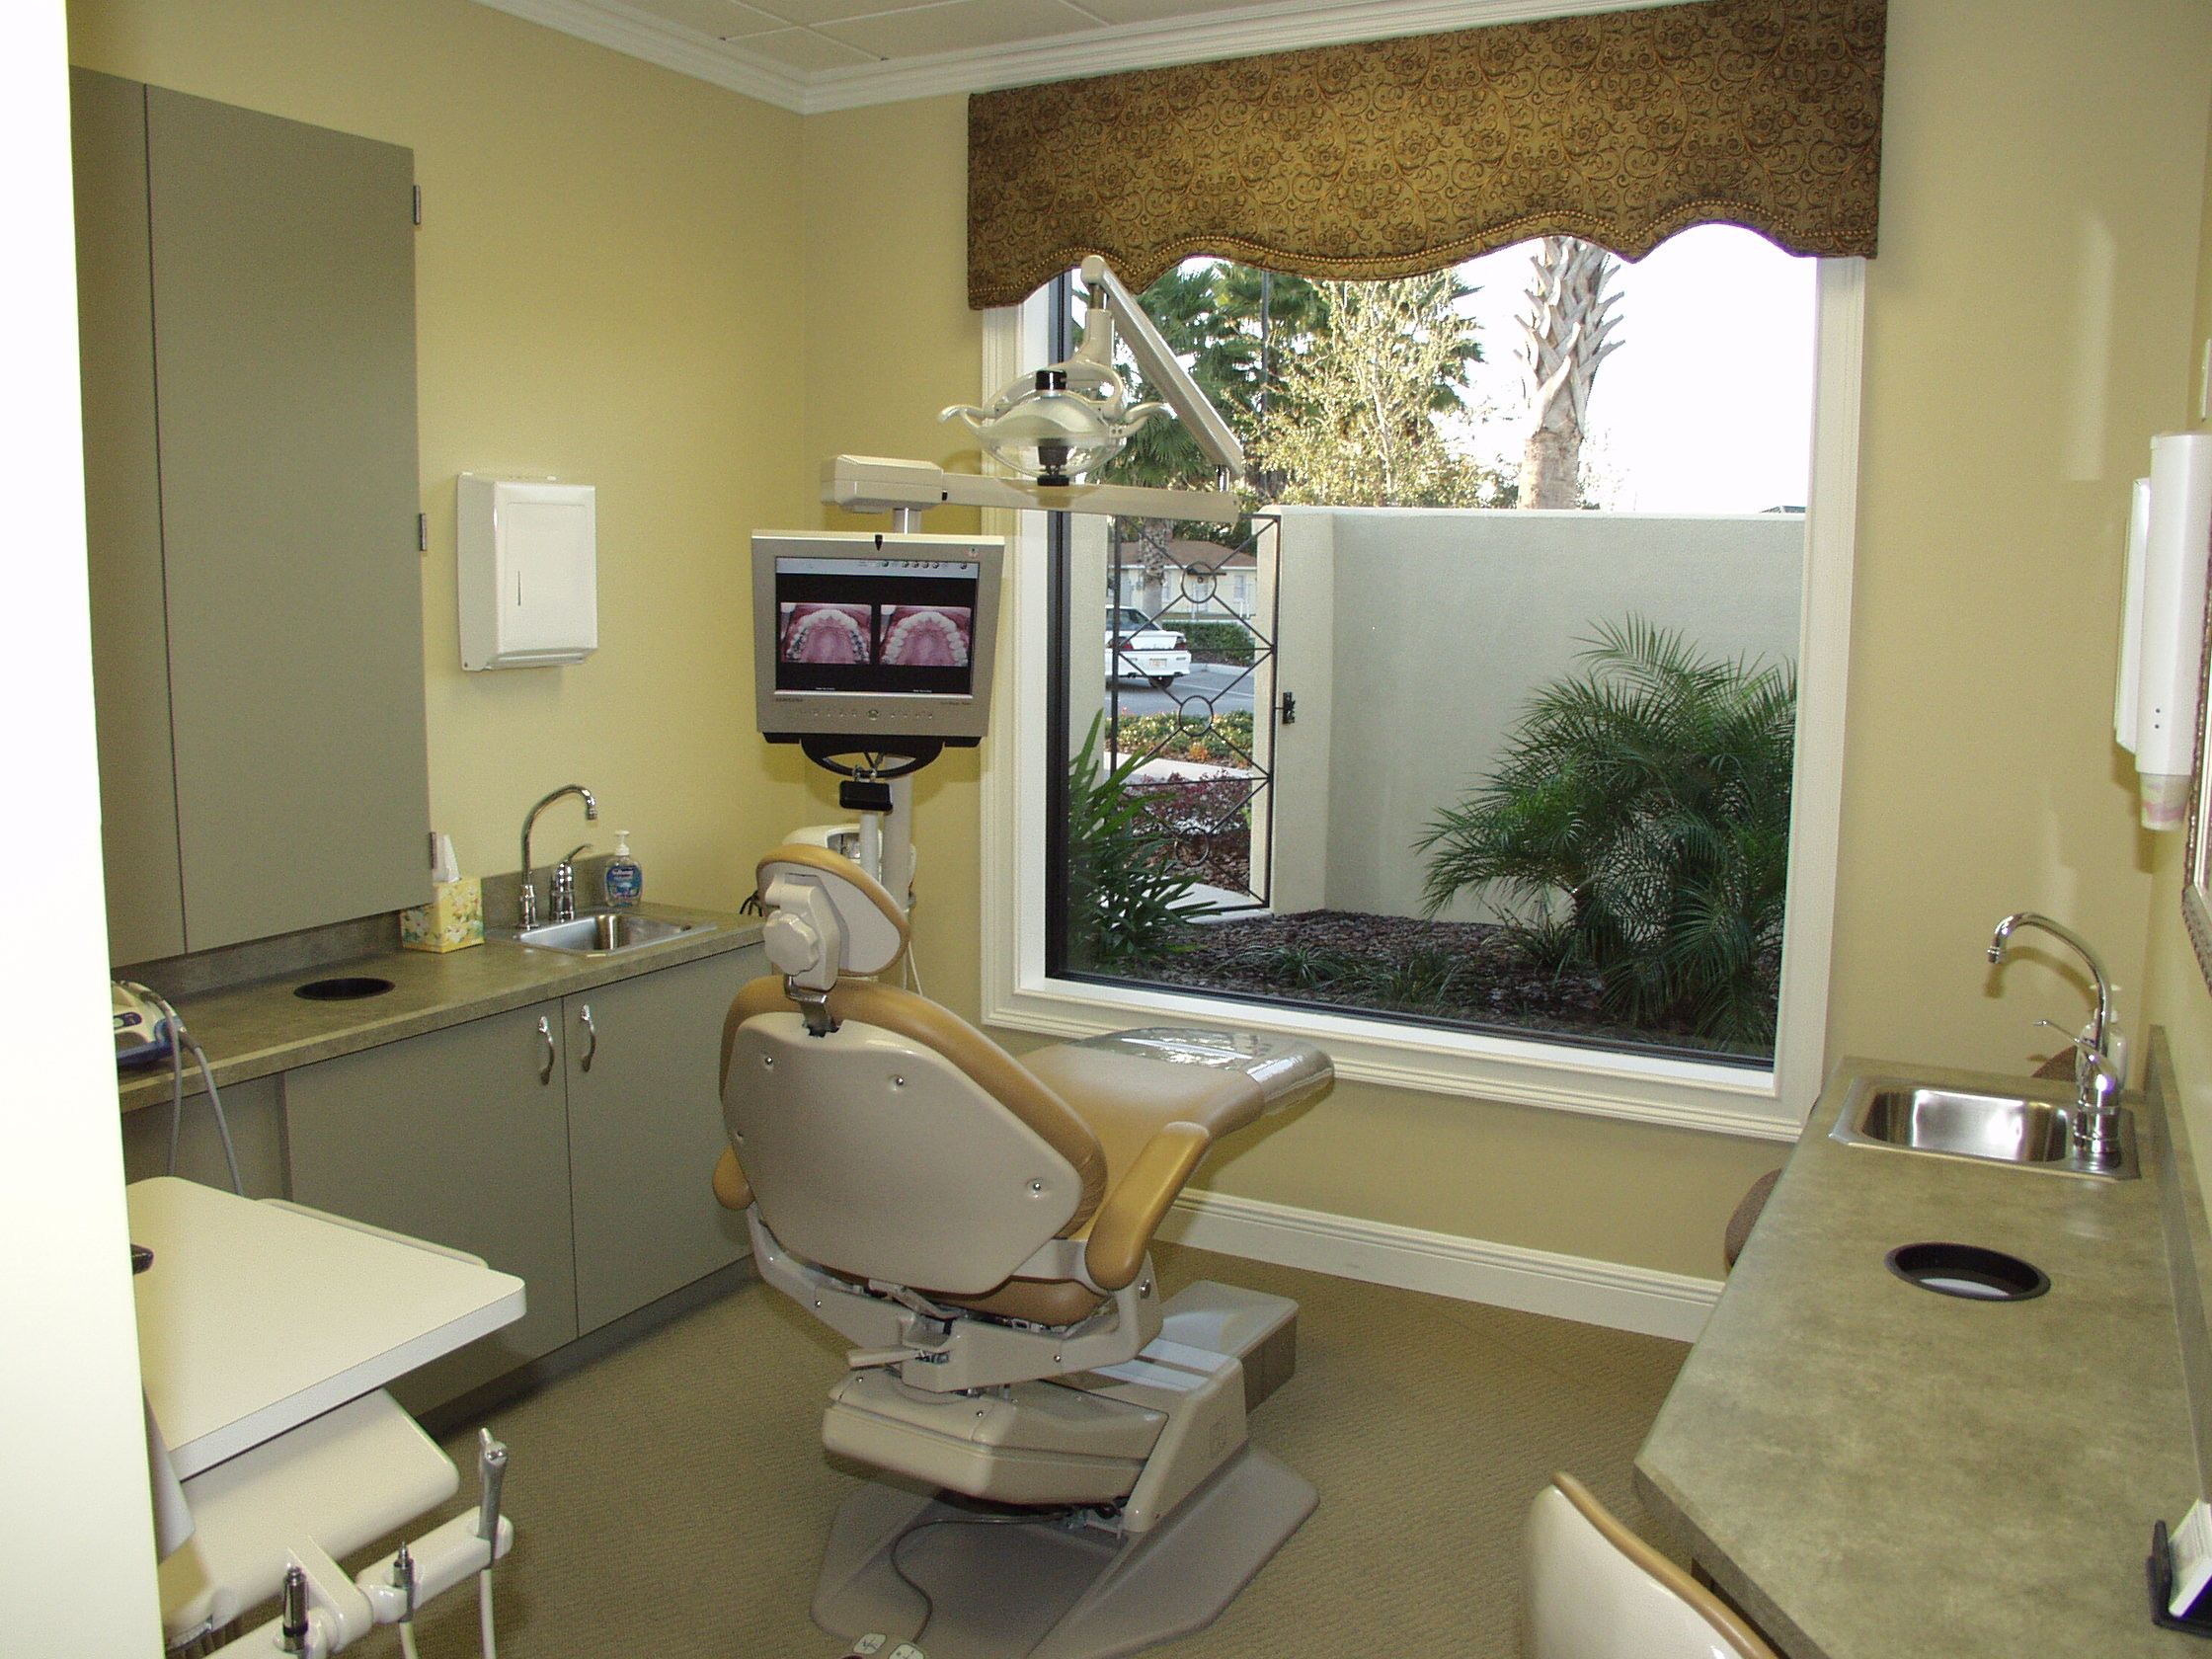 2240x1680 Dental Office Designs Dentists HD Wallpaper Pictures Top dental office .